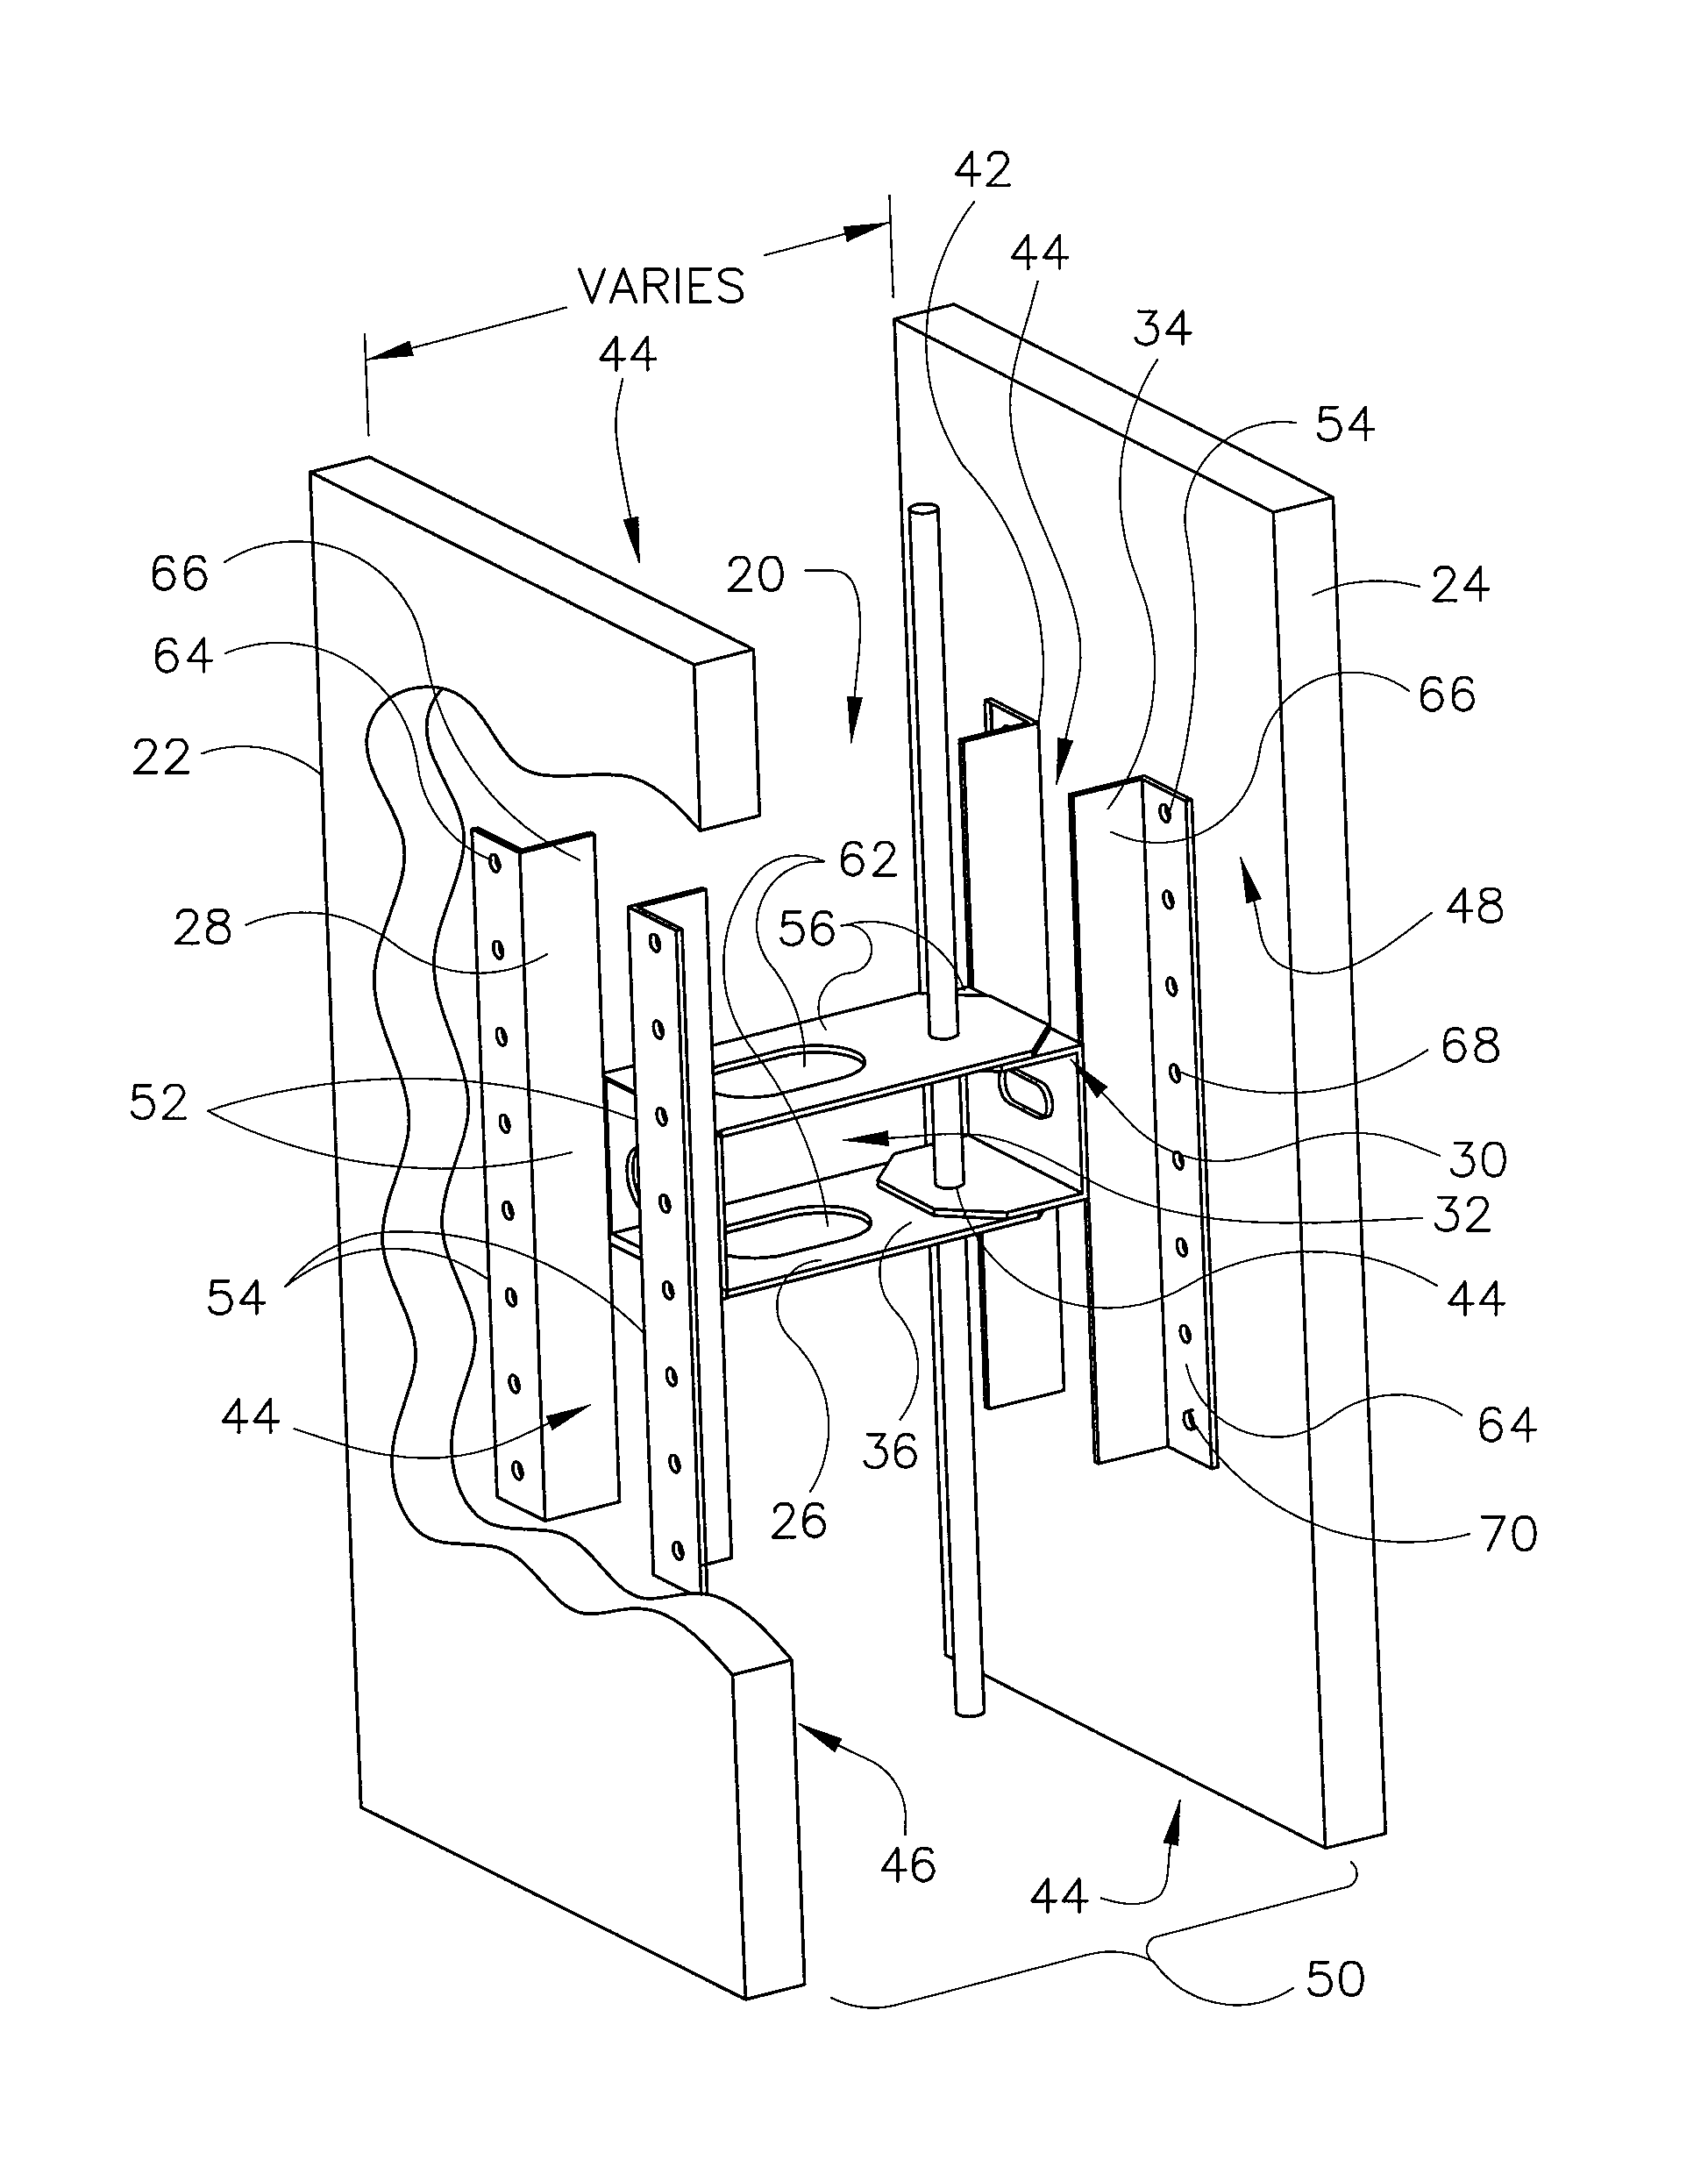 Load bearing wall formwork system and method